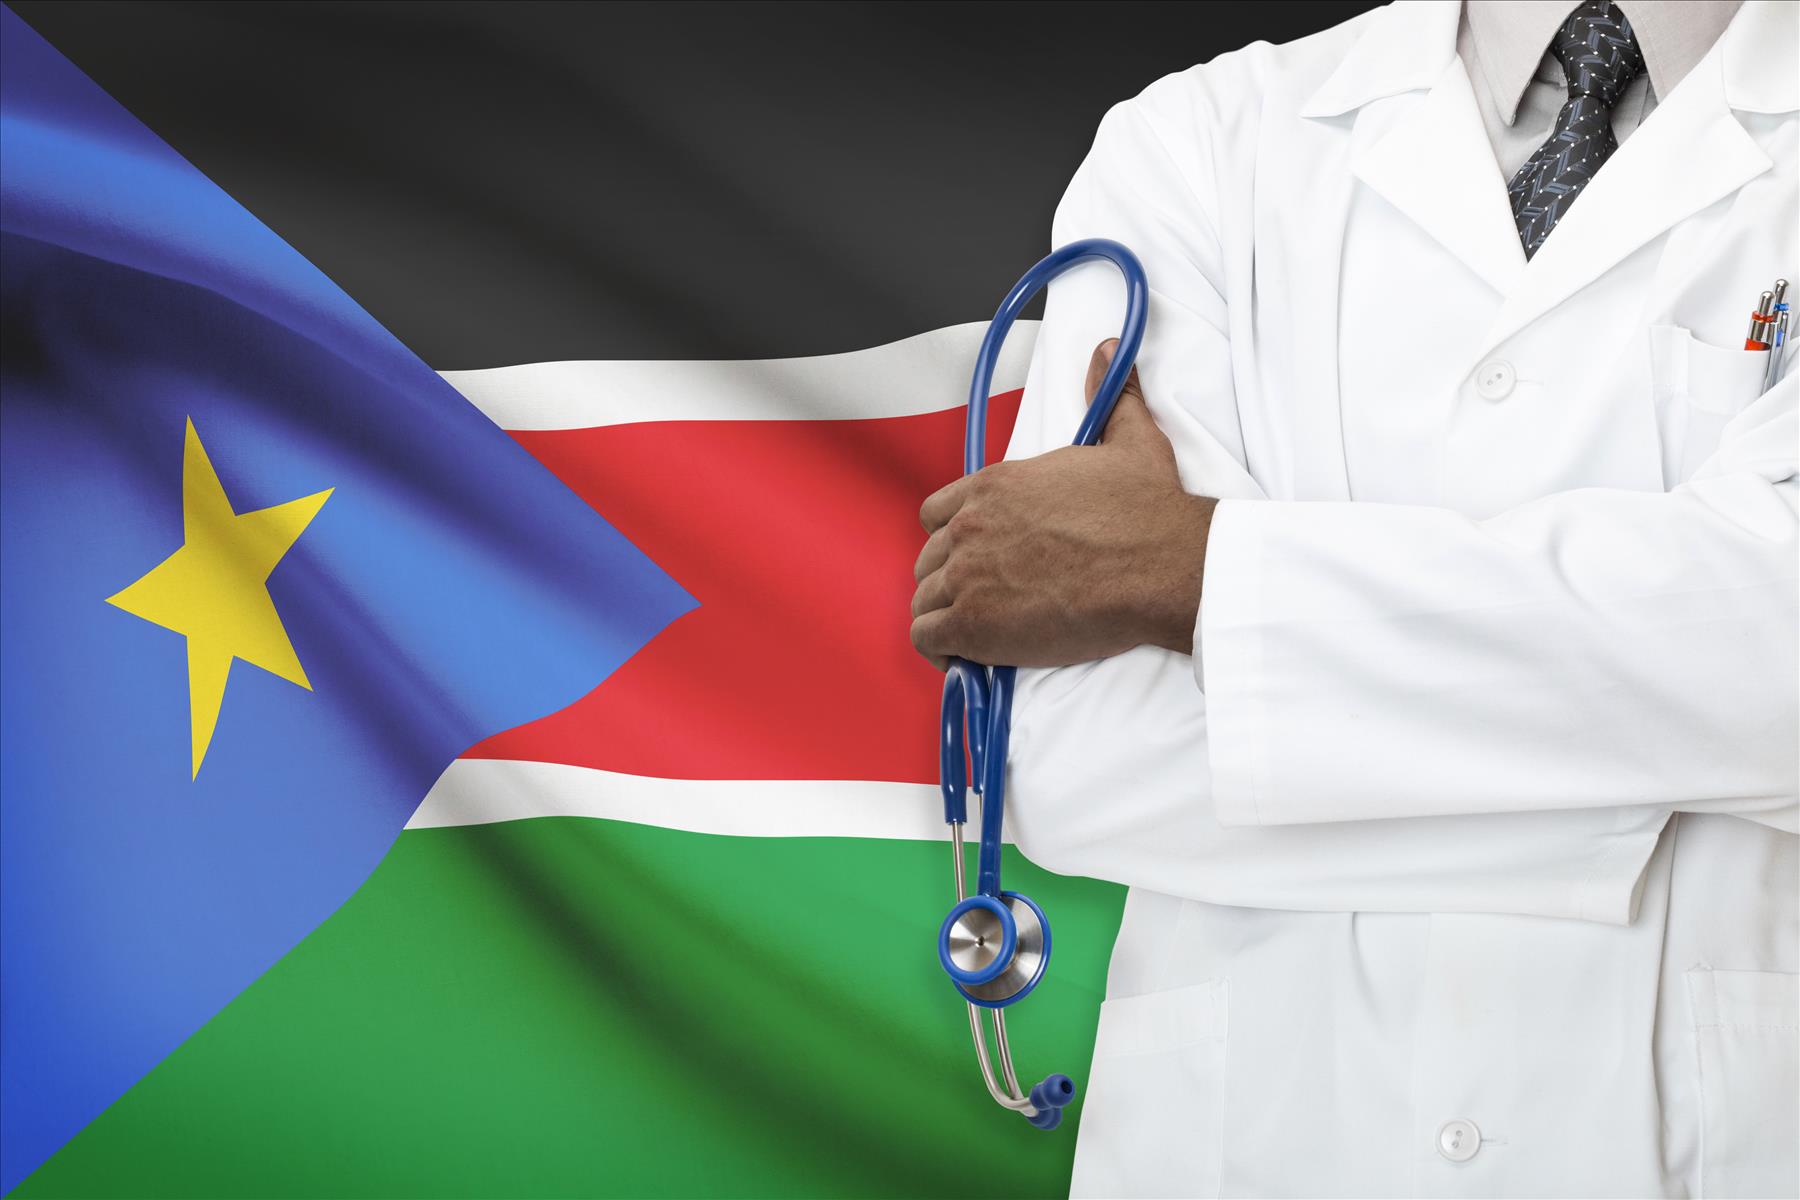 Salva Kiir’s health and language struggles, and the enslaved African